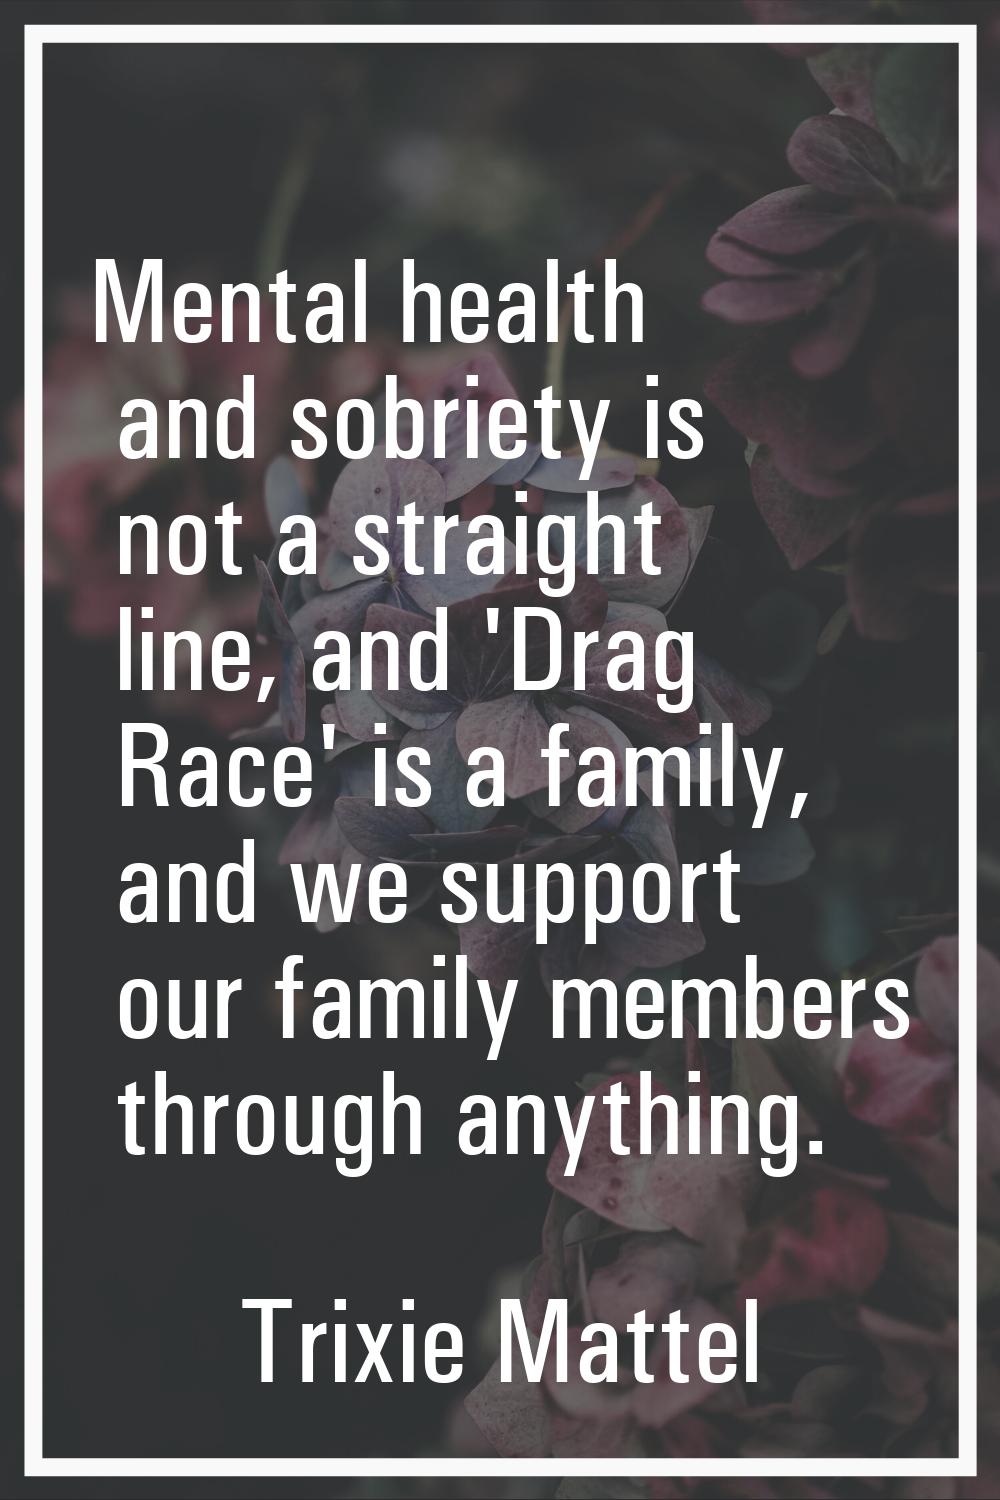 Mental health and sobriety is not a straight line, and 'Drag Race' is a family, and we support our 